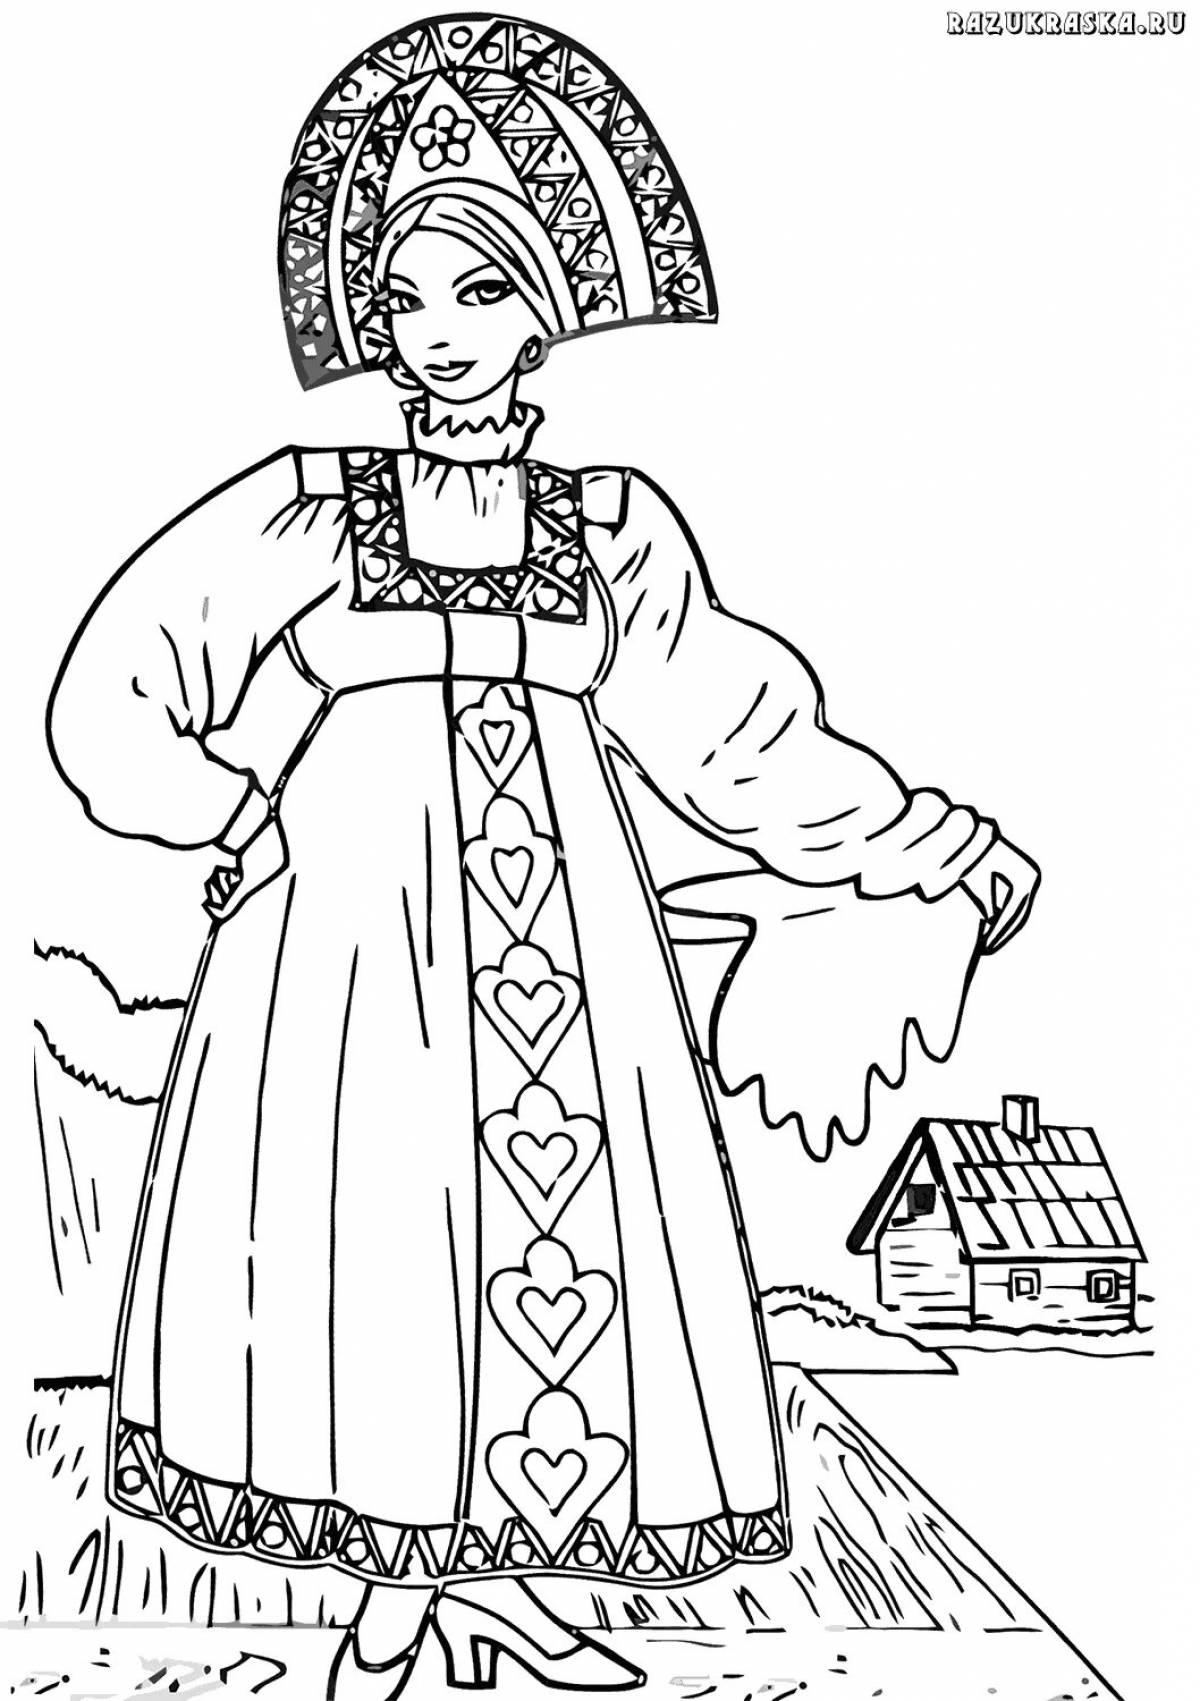 Dazzling Russian costume coloring book for kids